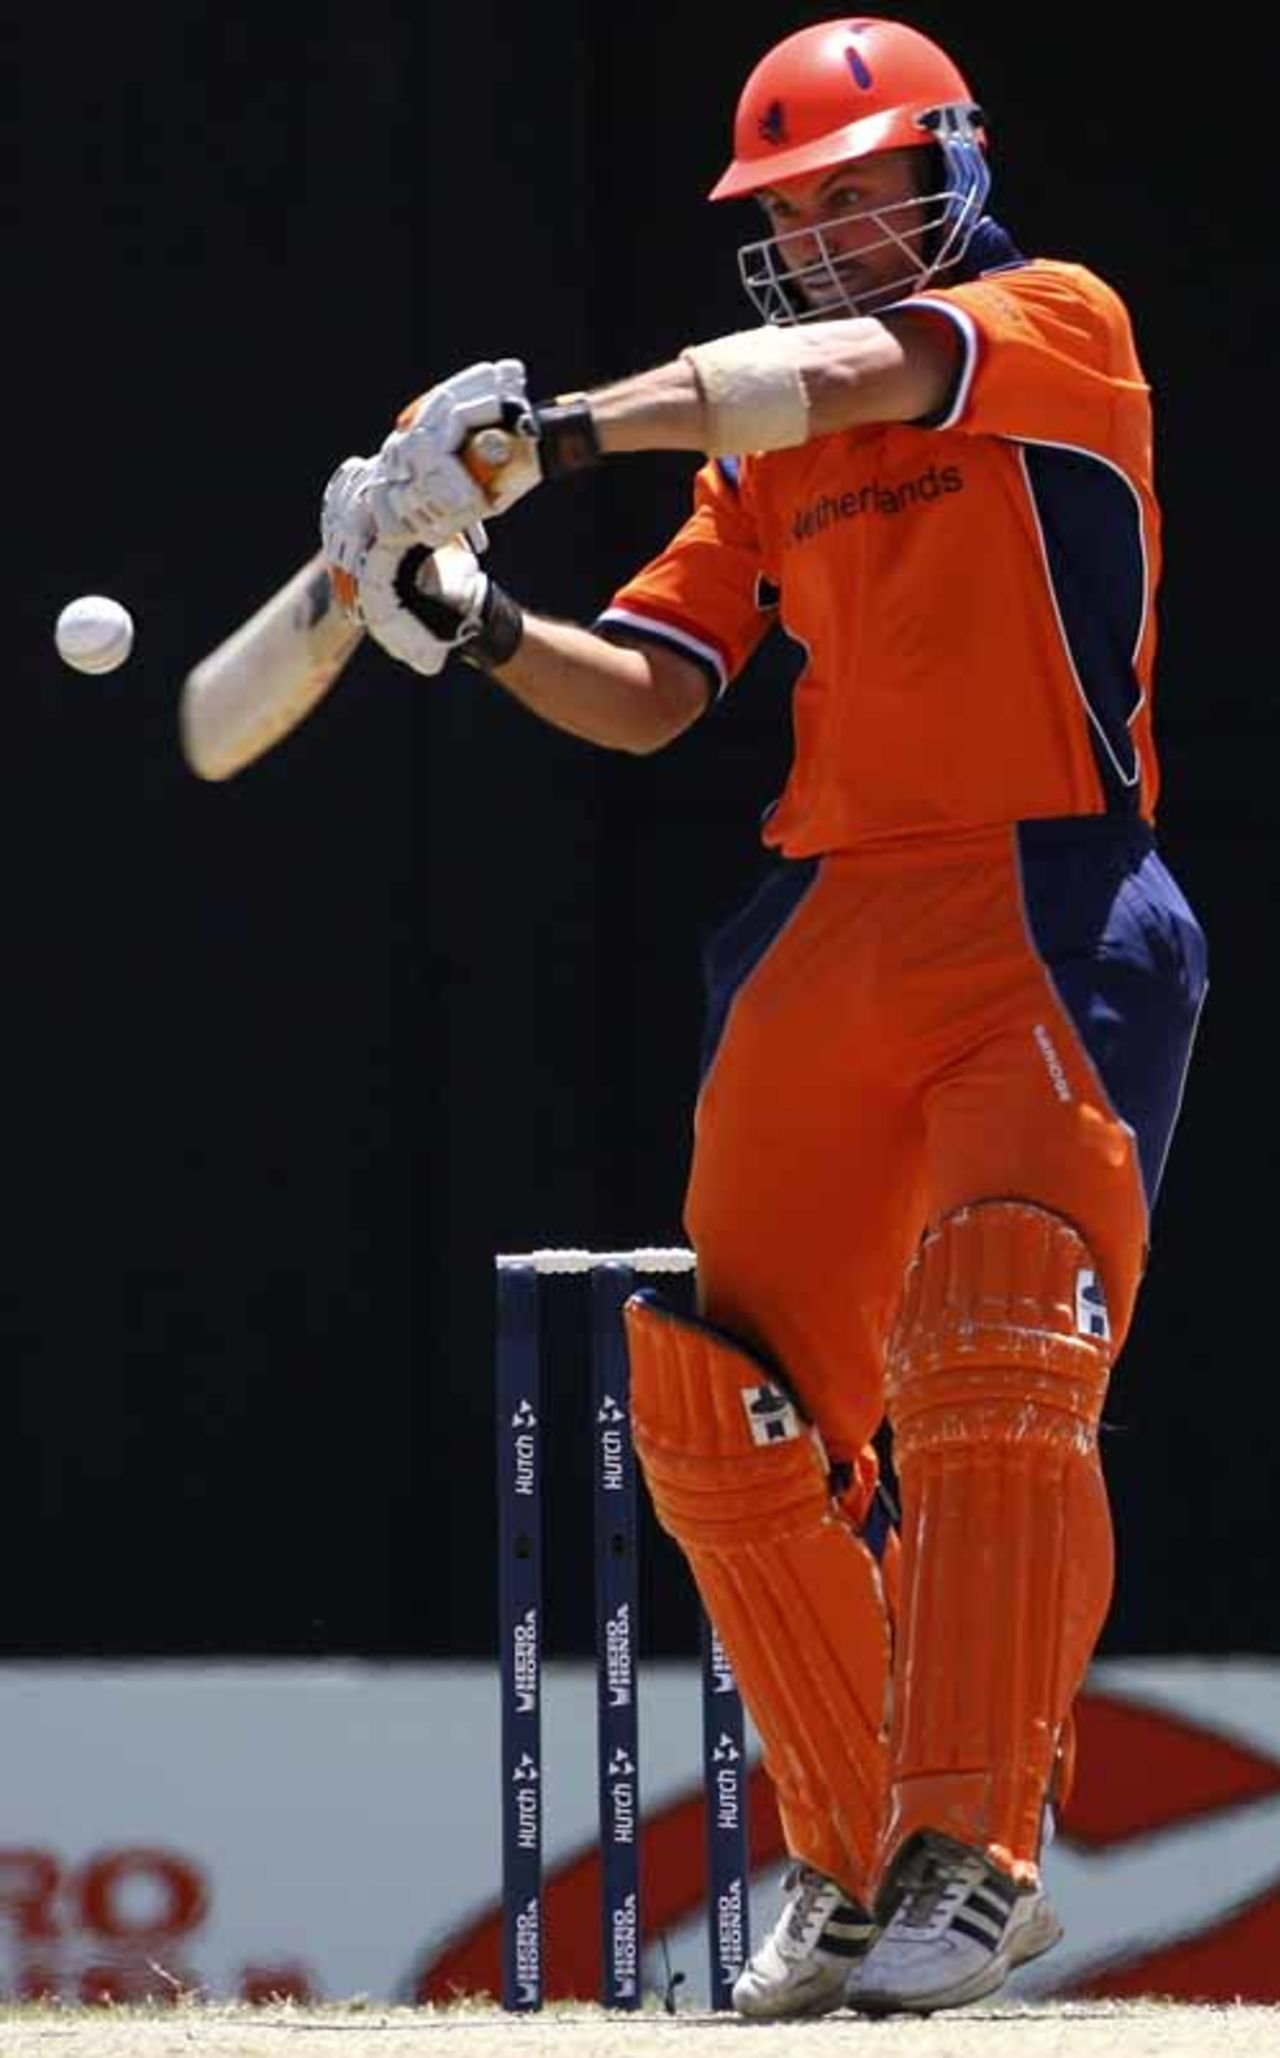 Bas Zuiderent glides one behind the wicket, Netherlands v Scotland, Group A, St Kitts, March 22, 2007